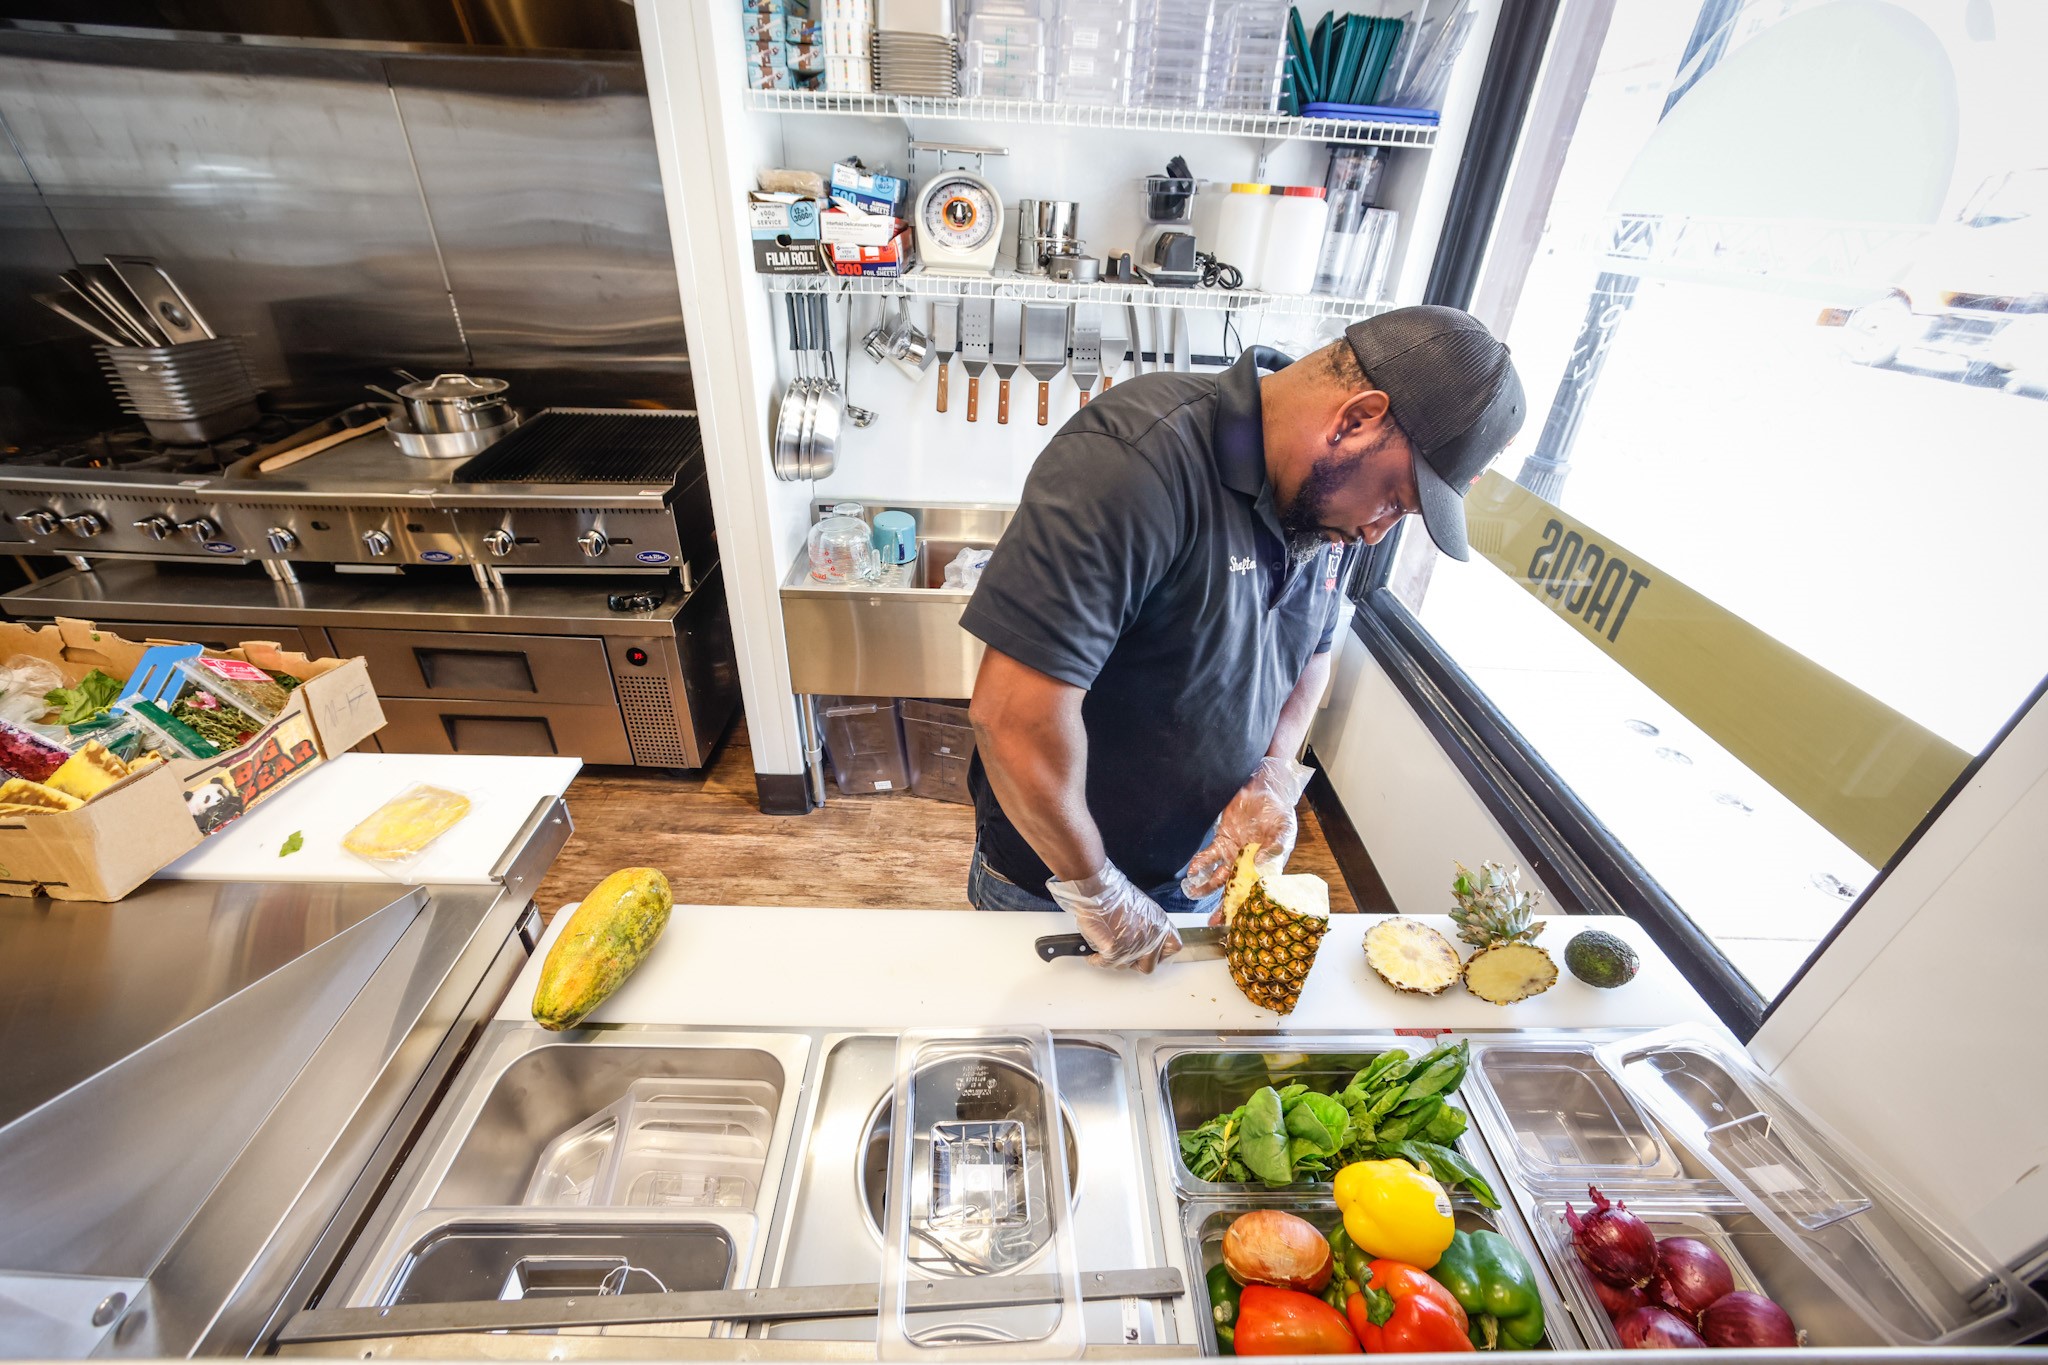 SOCA owner, Shafton Greene readies his kitchen at West Social Tap and Table, located at 1100 West Third St. in Dayton. The food hall plans to open July 25, 2022 and features six local restaurants. JIM NOELKER/STAFF